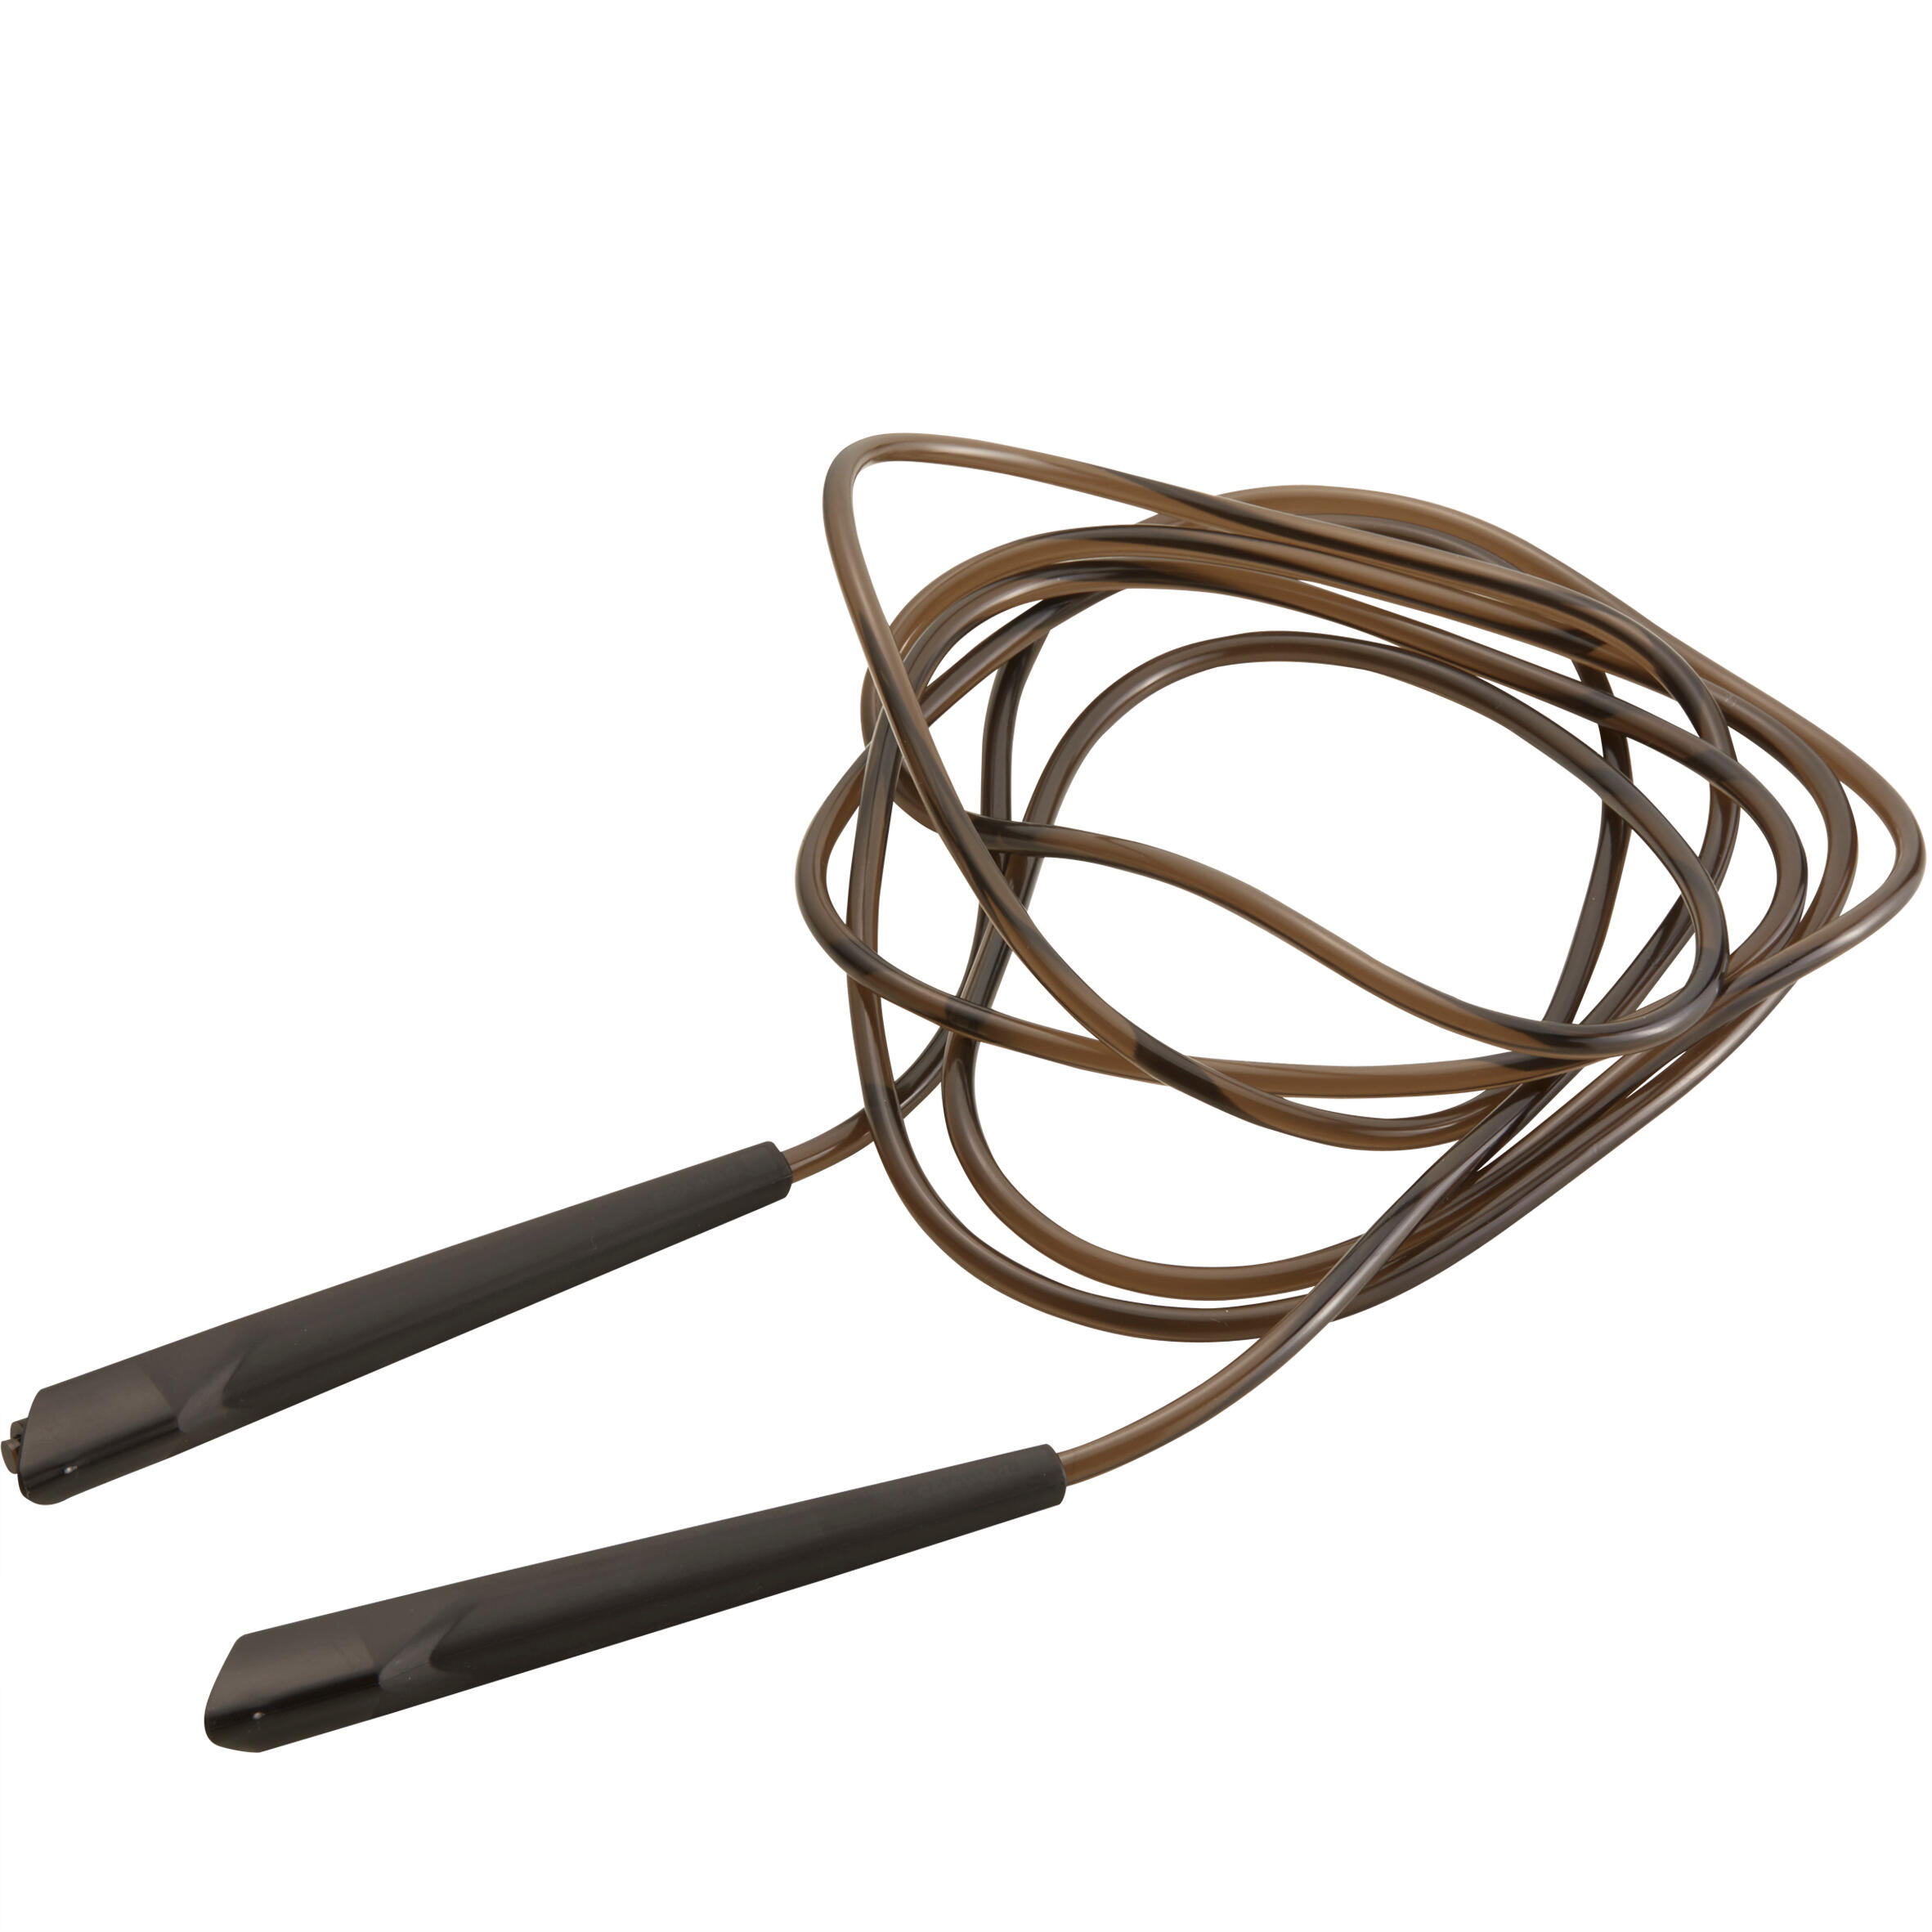 Buy the best Skipping Ropes online at 